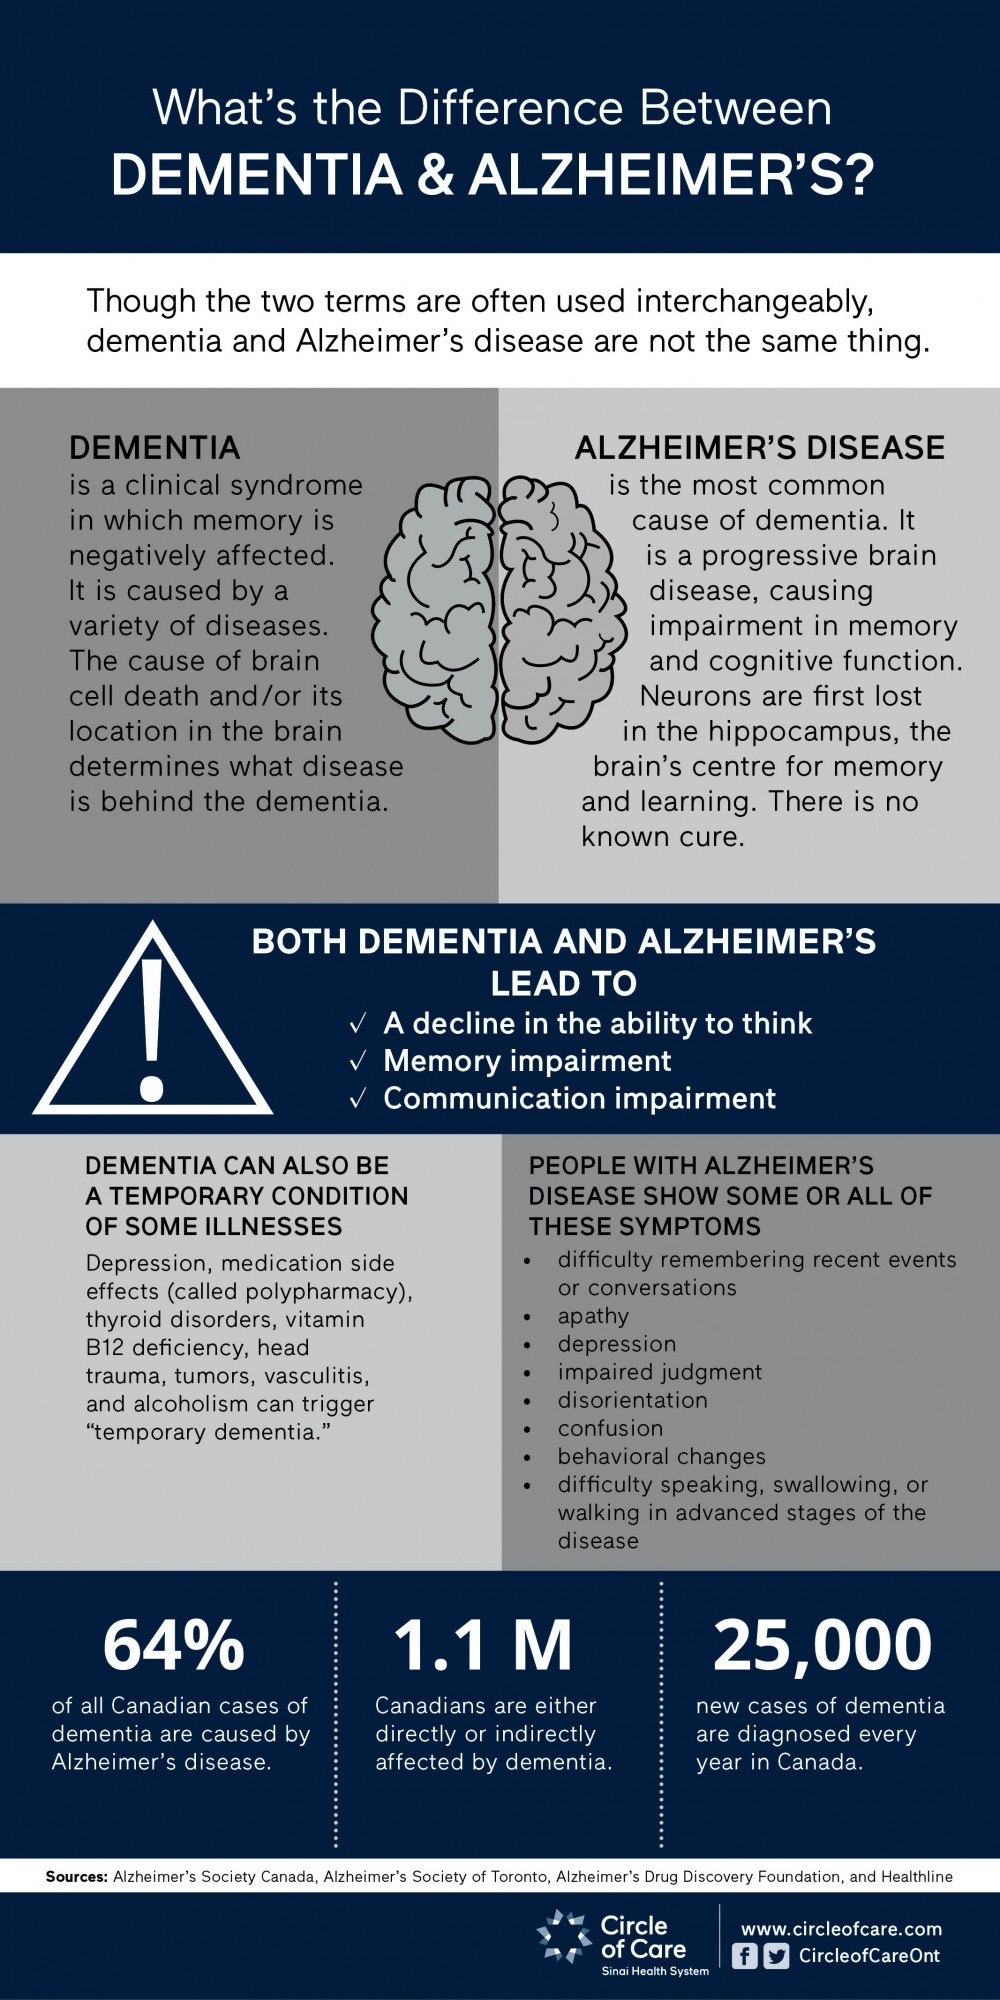 Infographic explaining the difference between Dementia and Alzheimer's disease